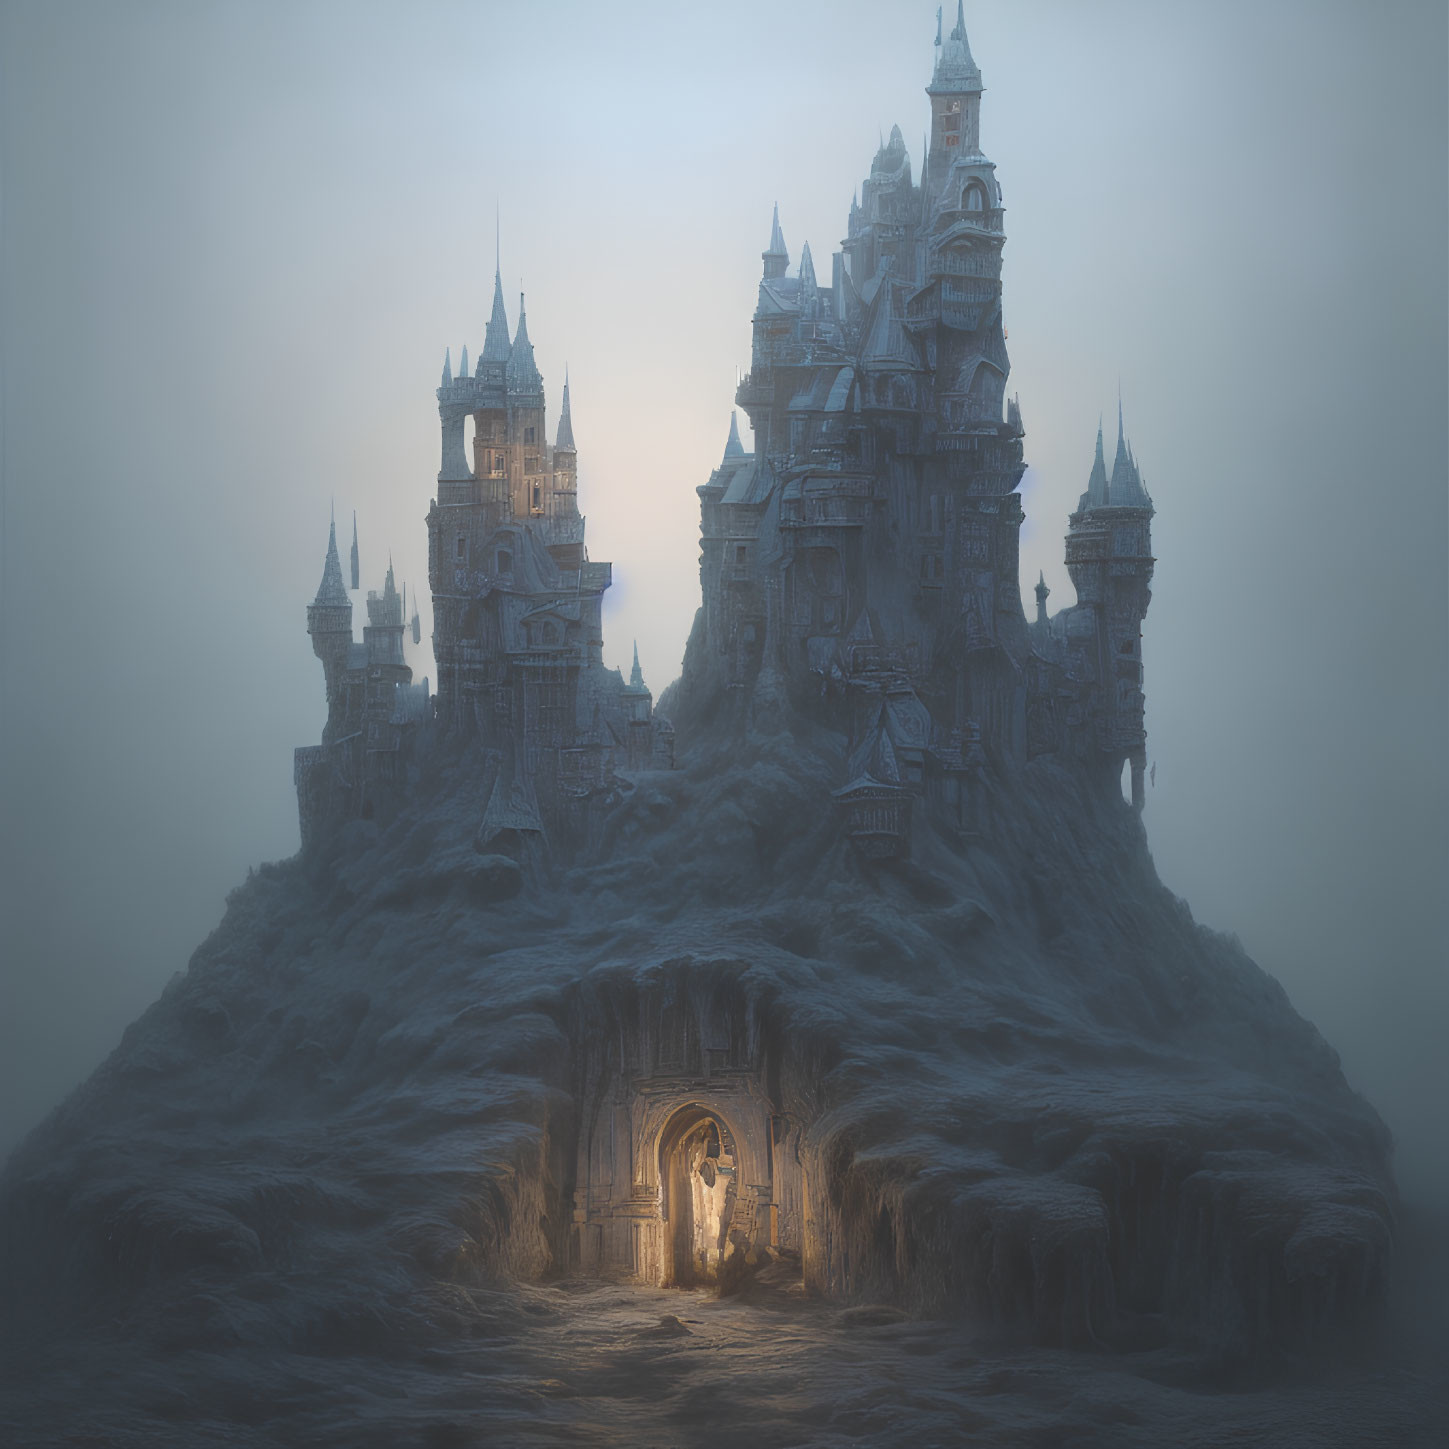 Mystical castle with spires in mist on rocky hill with glowing entrance